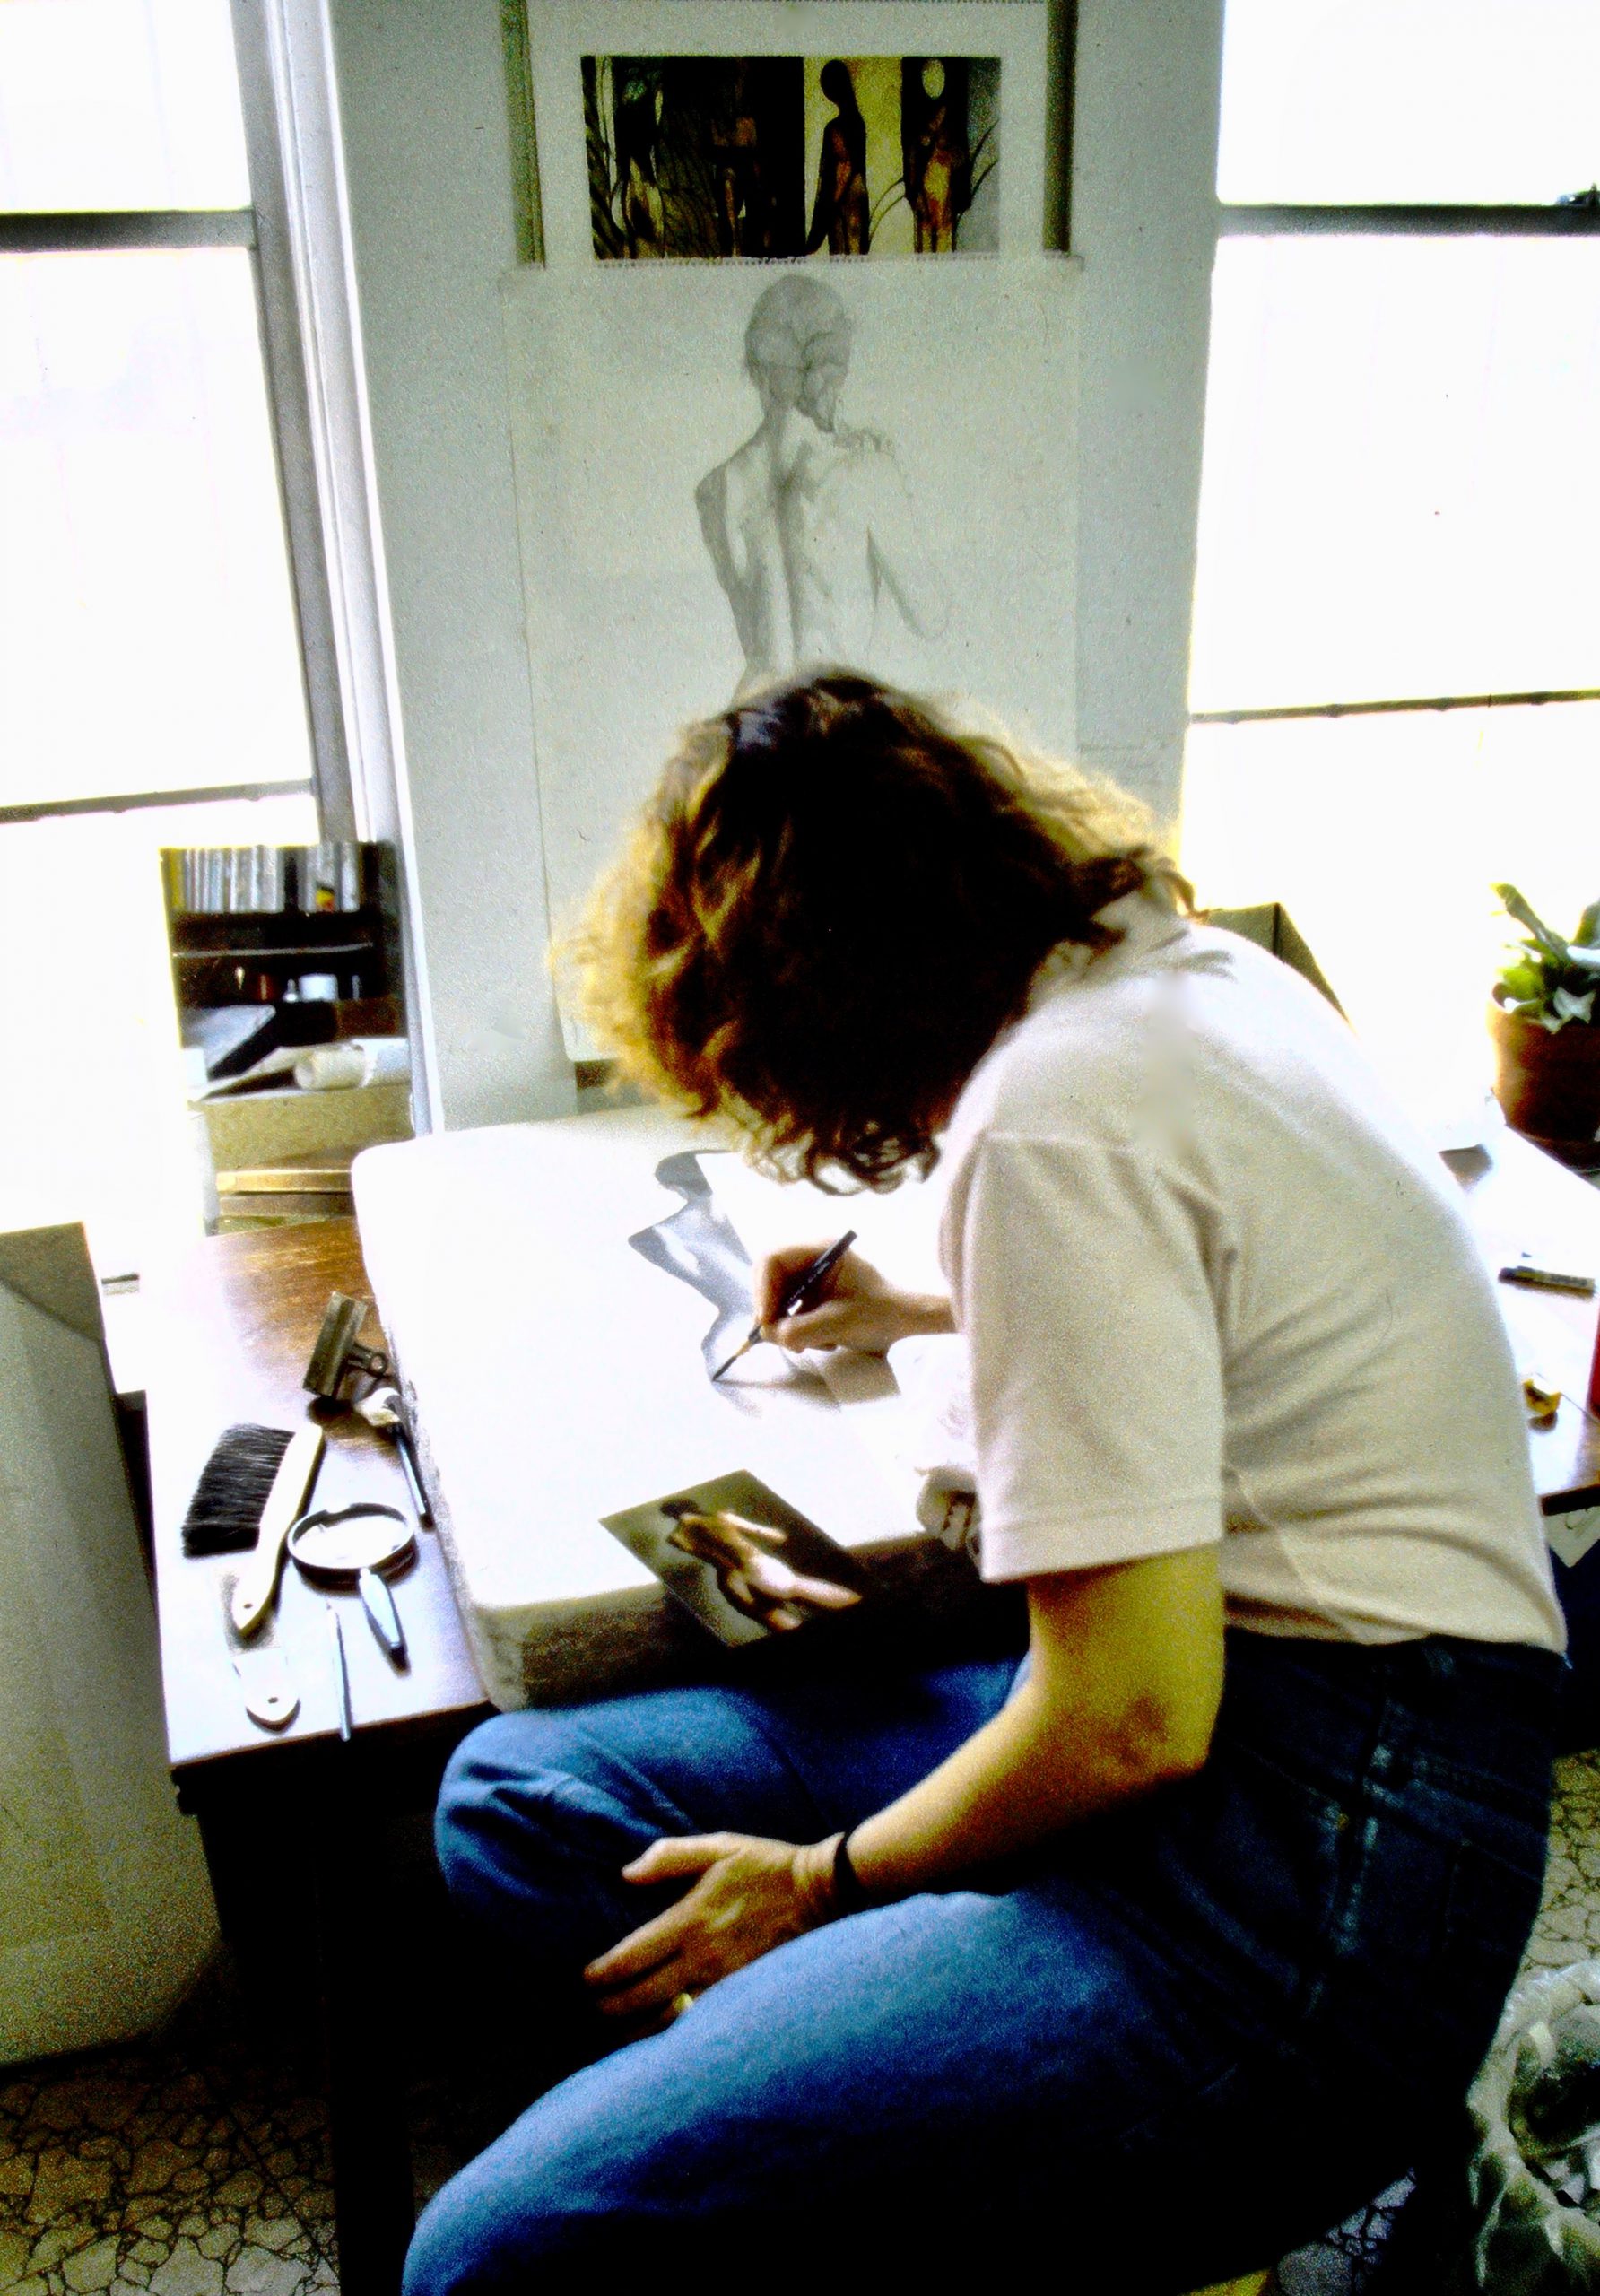 Image of the artist working on a lithograph